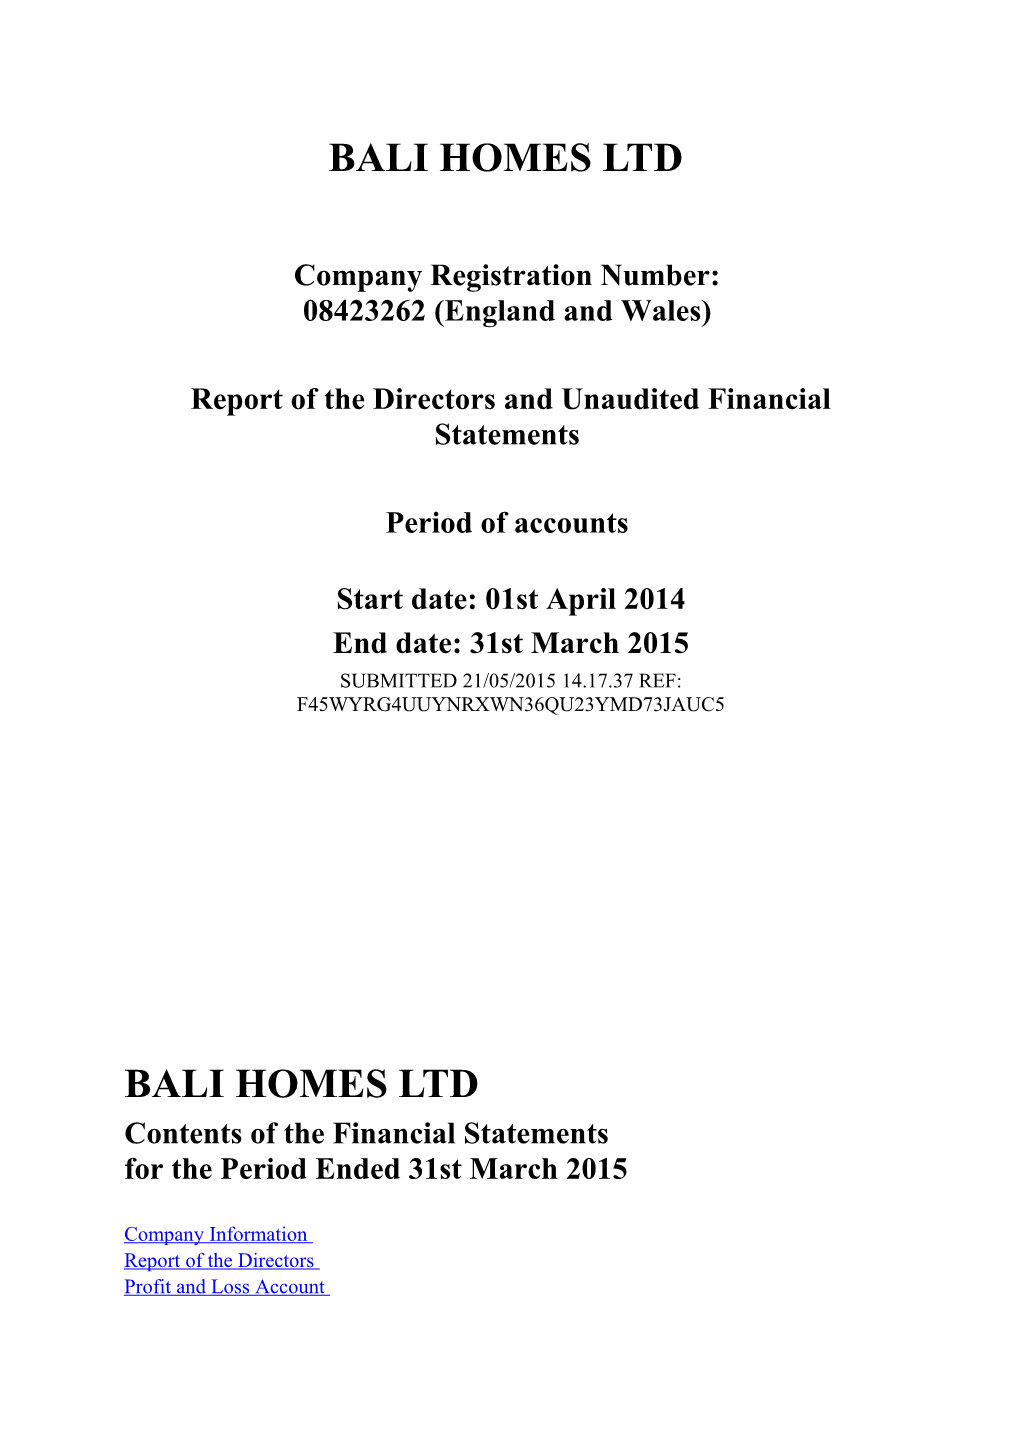 Report of the Directors and Unaudited Financial Statements